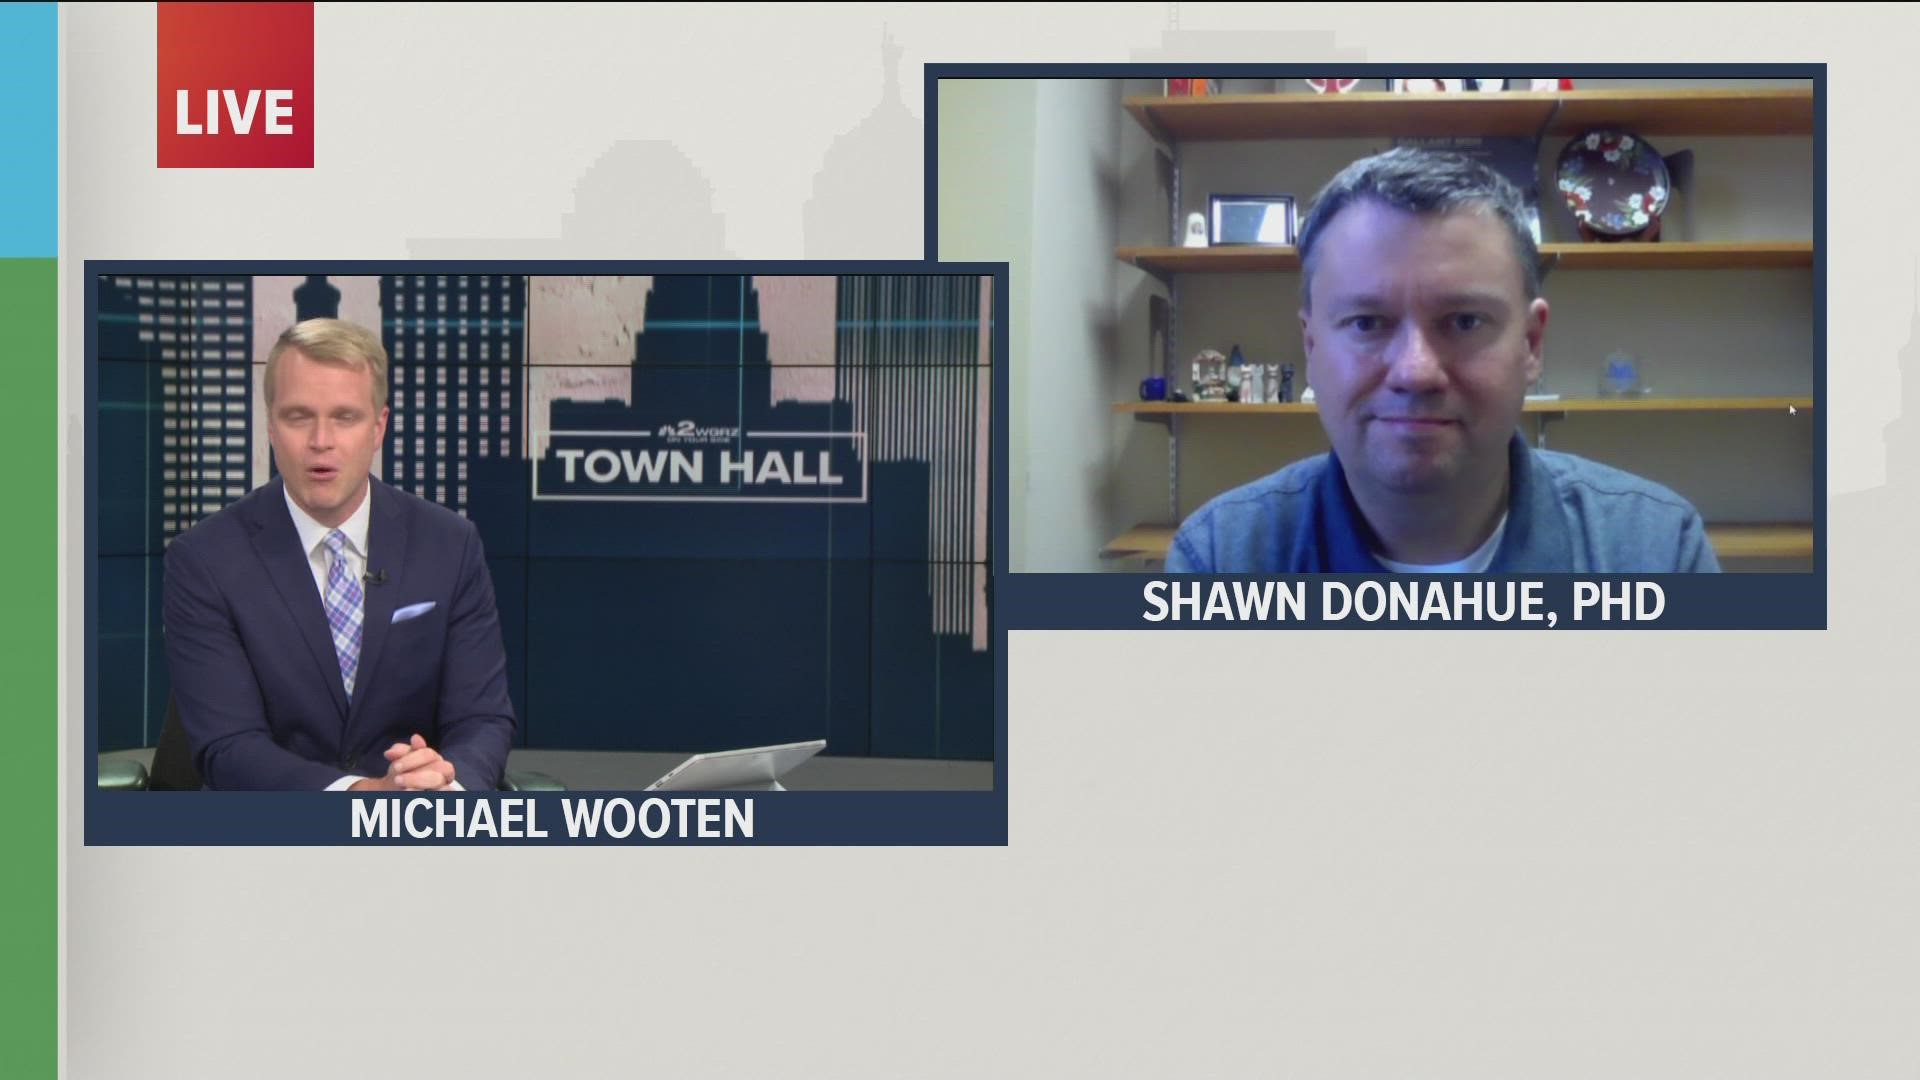 Professor Shawn Donahue with the Political Science department at the University at Buffalo joins the Town Hall to discuss the lack of debates.